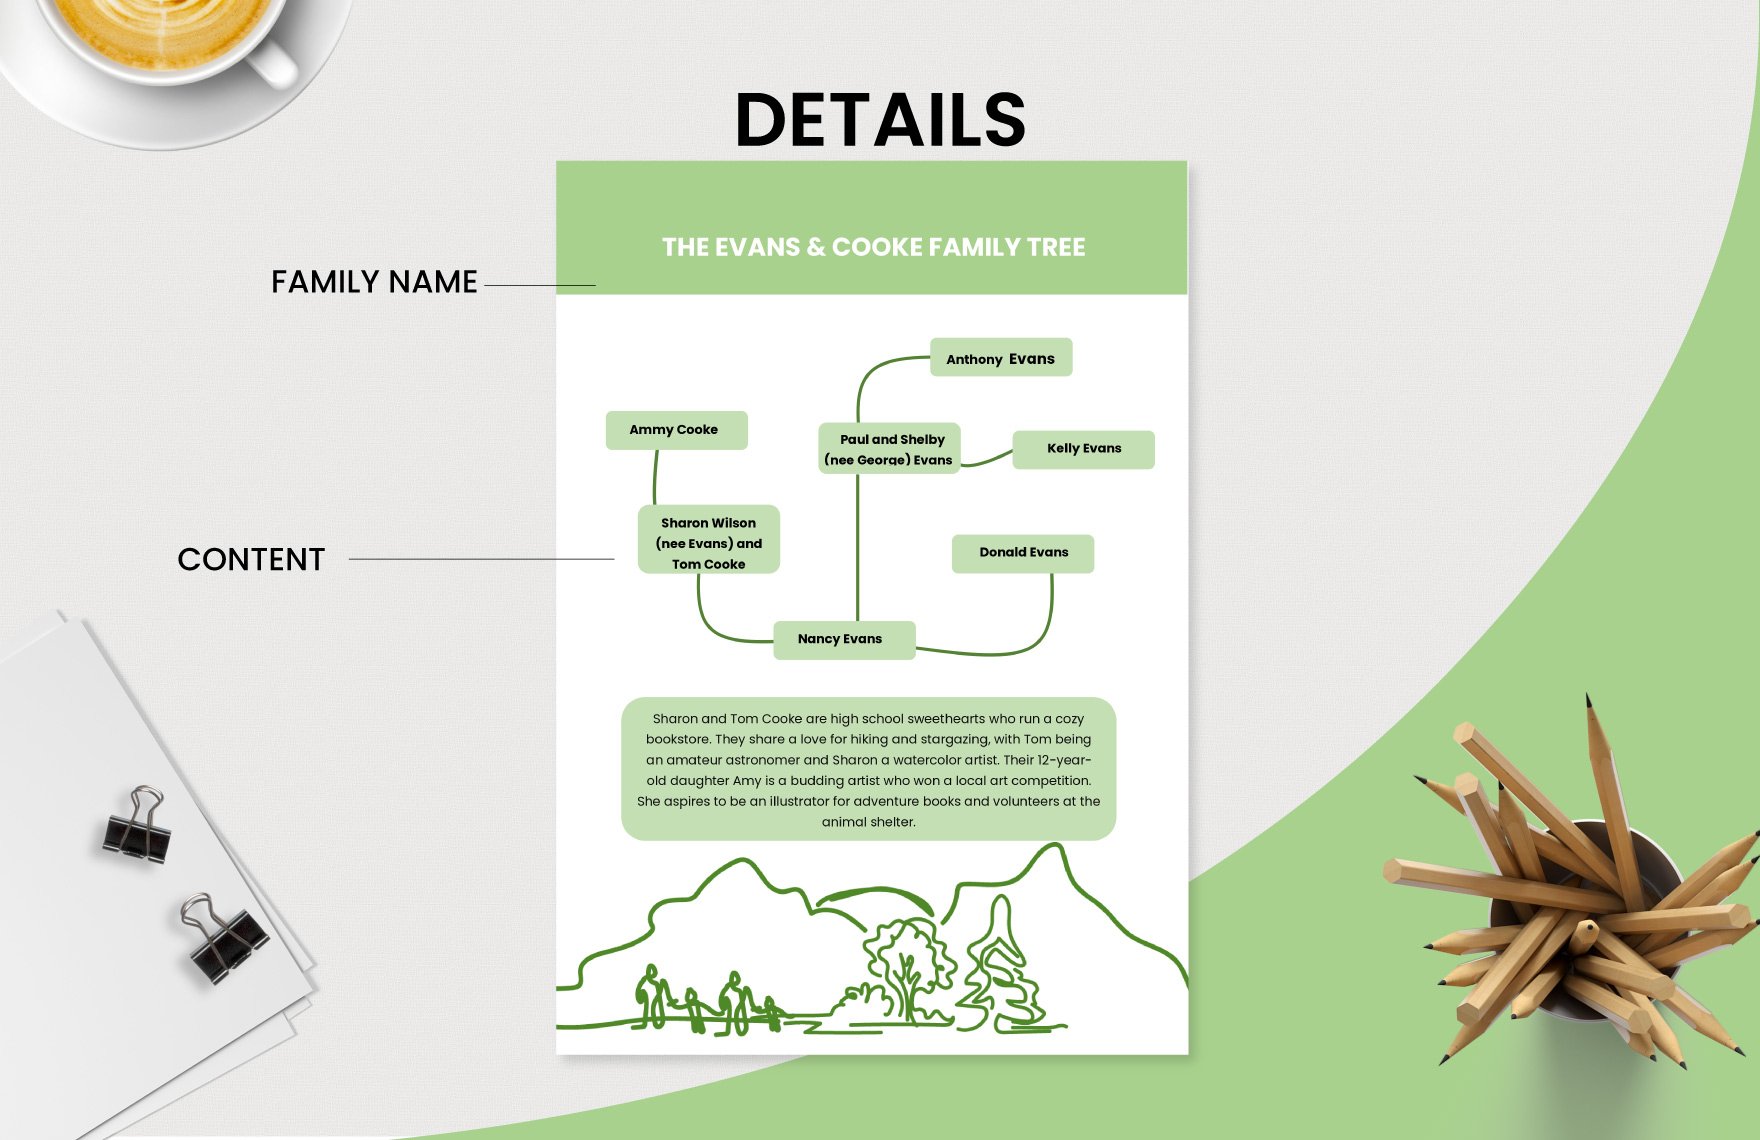 Family Tree Drawing Template